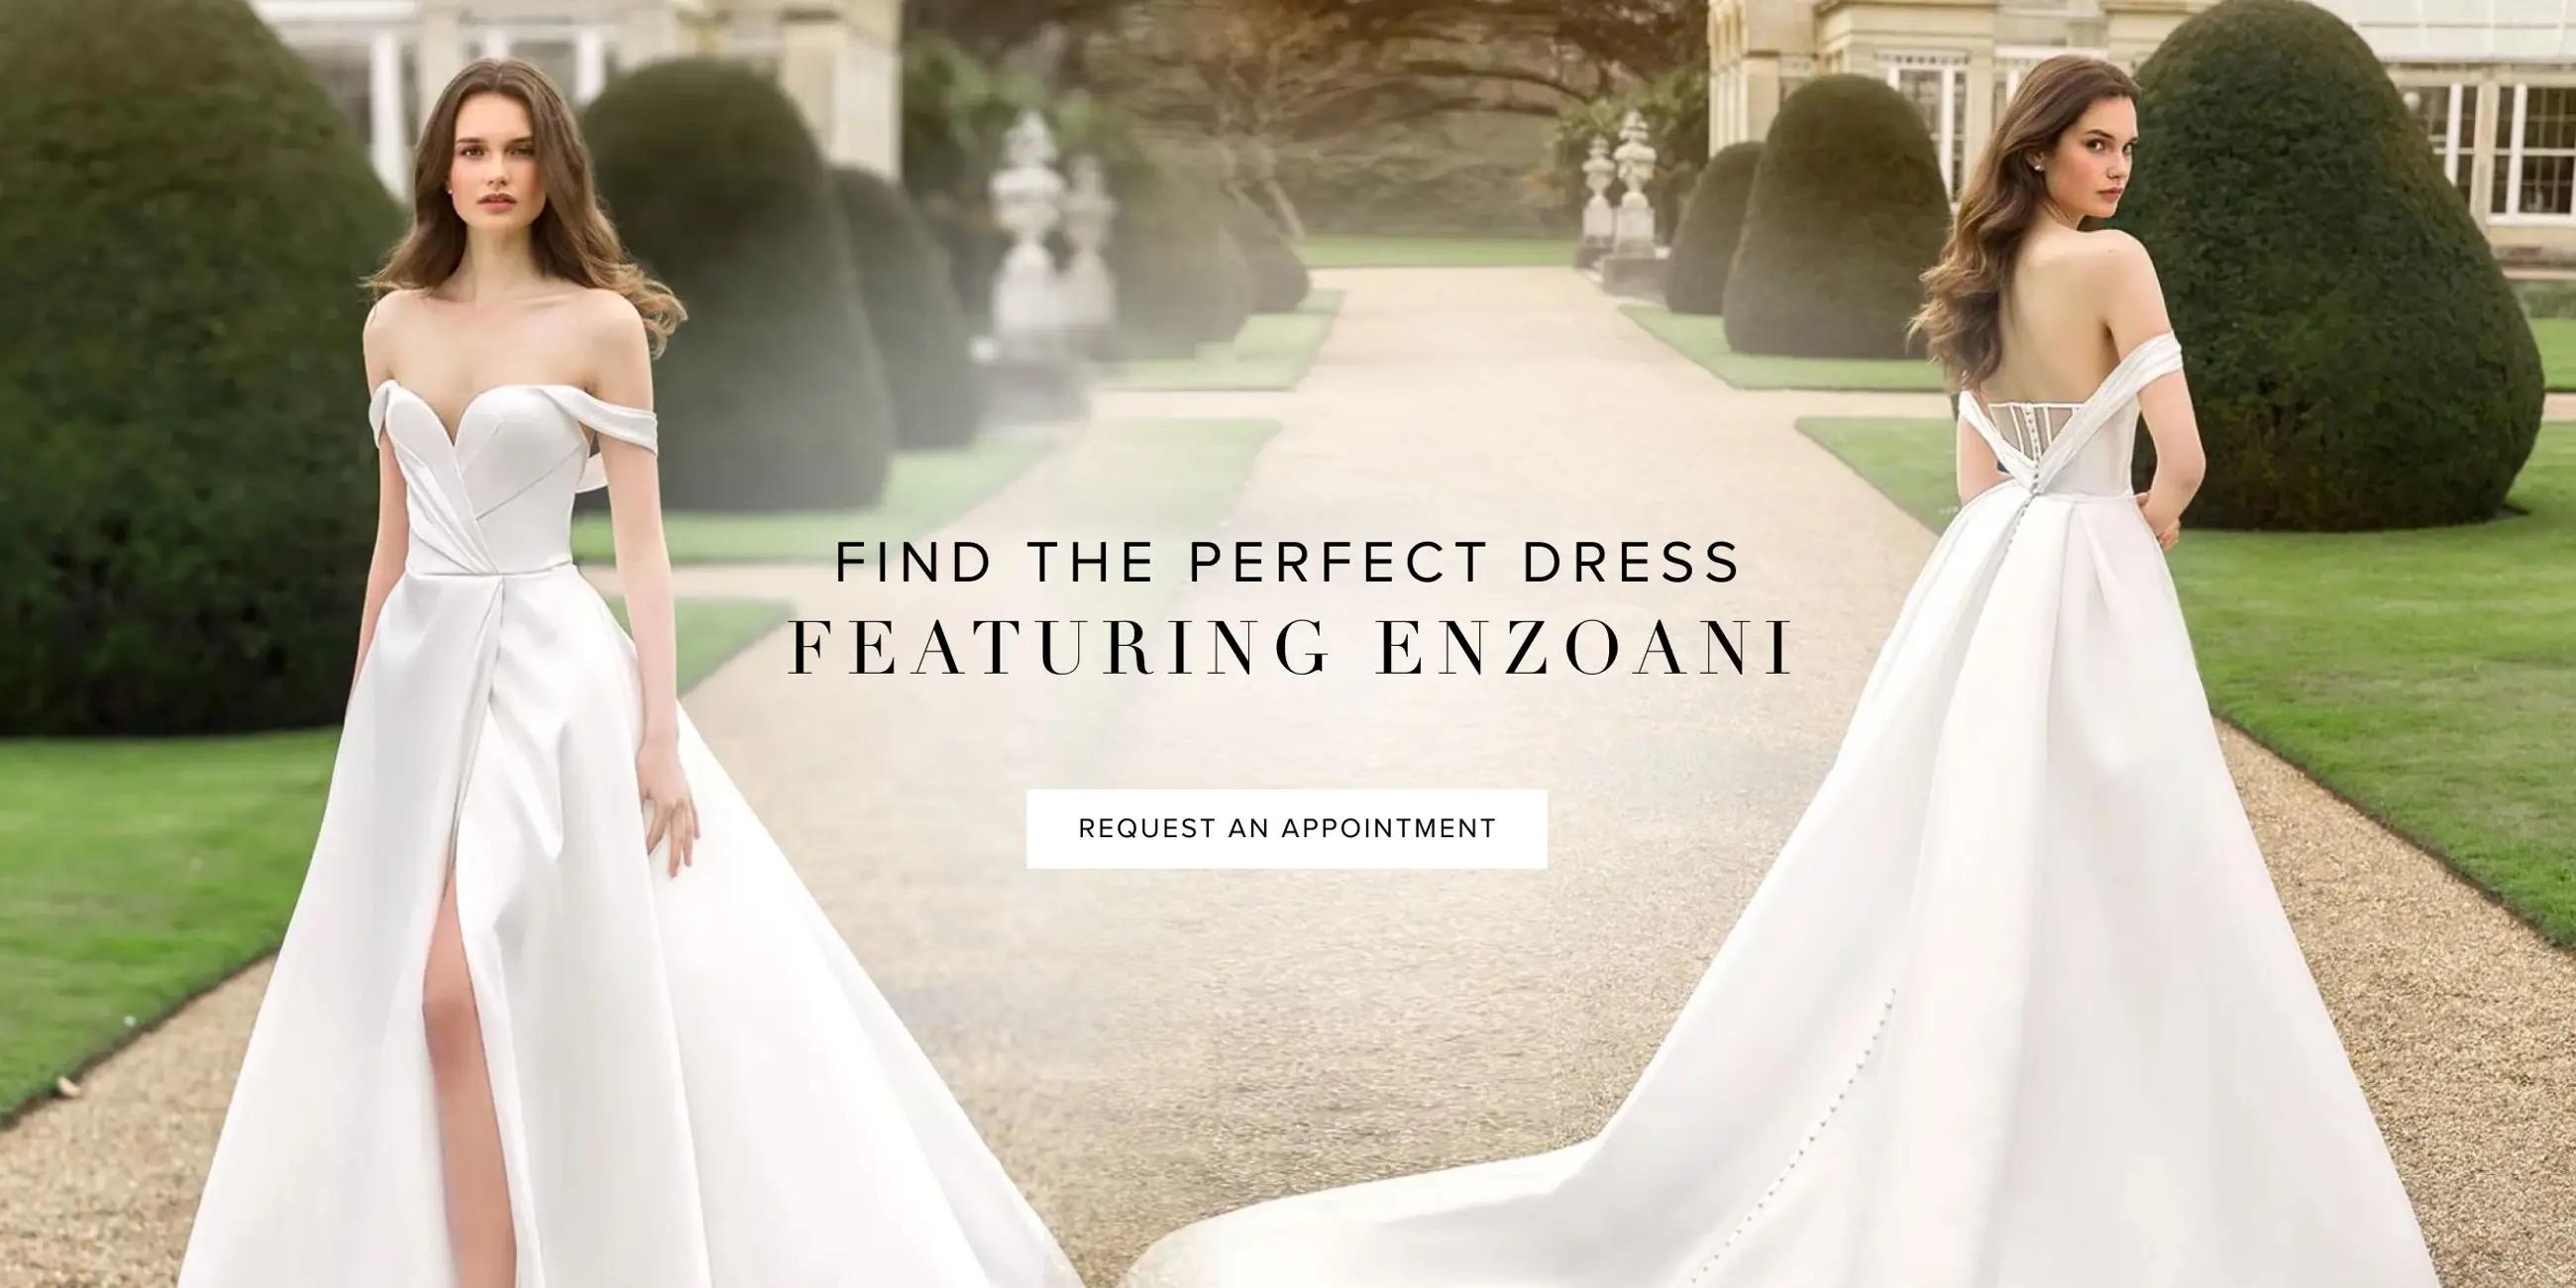 Find the perfect dress. Featuring Enzoani. Desktop banner